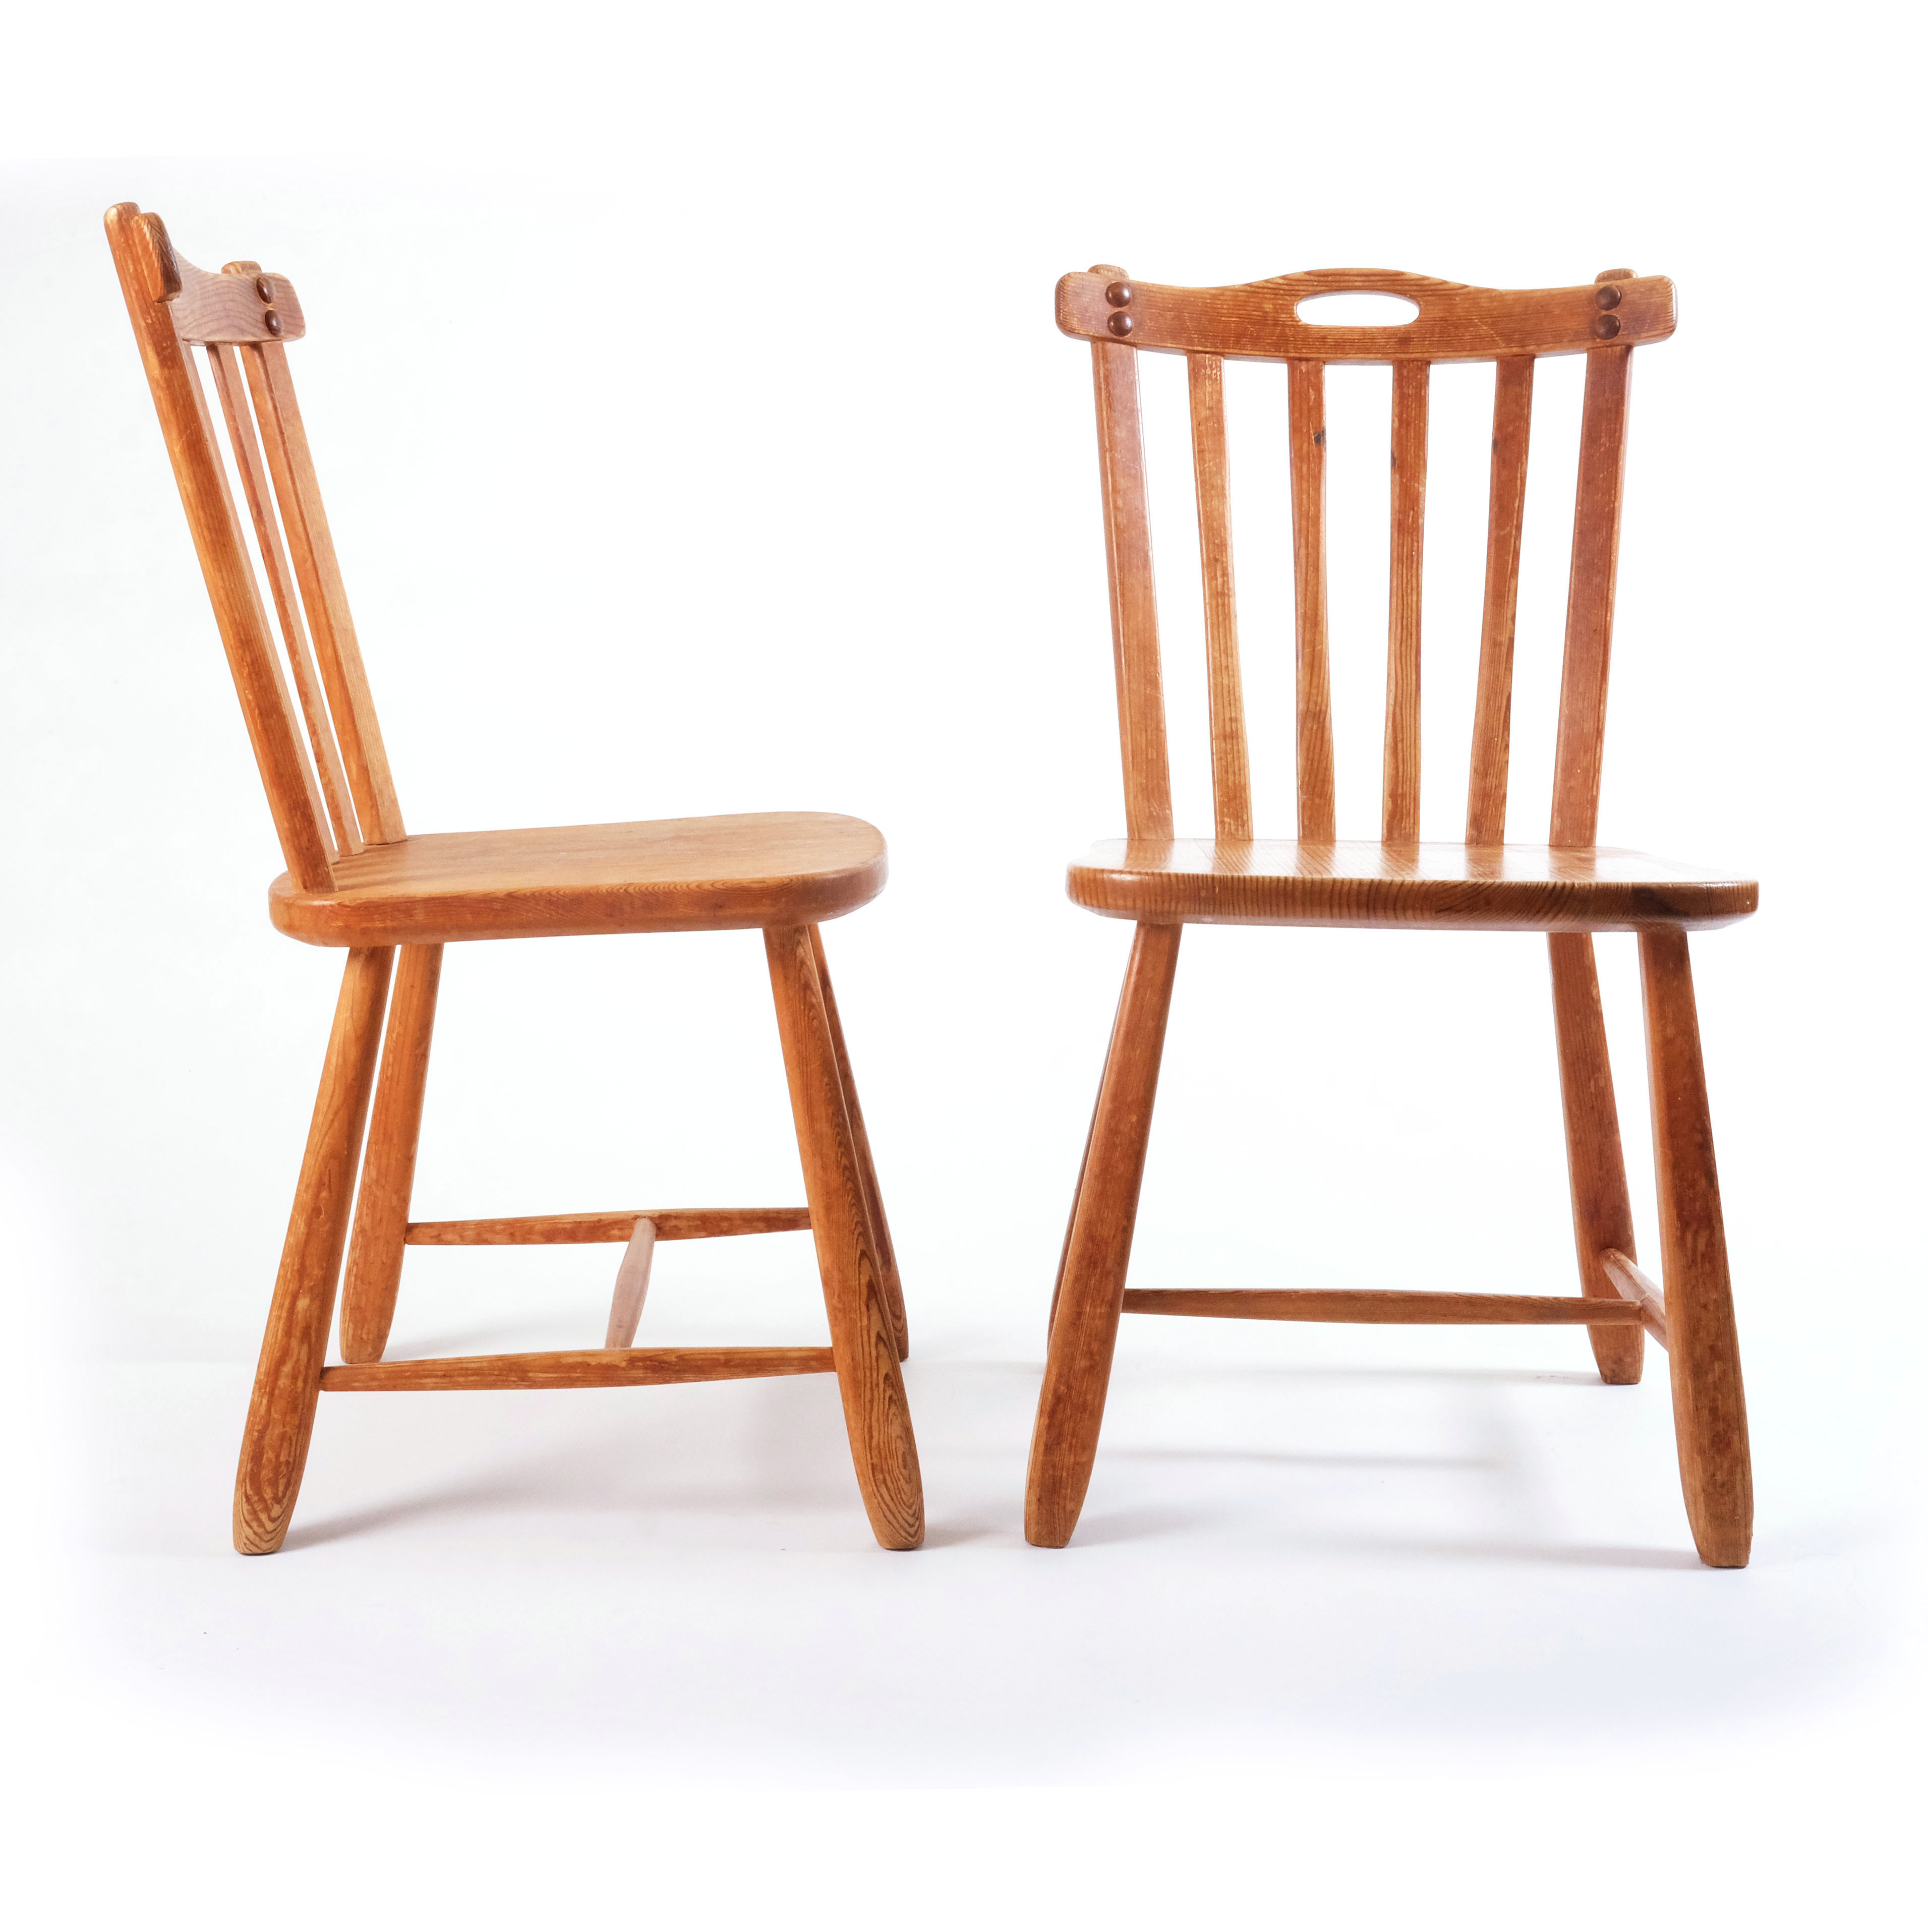 Two Swedish Sport Cabin Chairs in pine by David Rosén for NK, Sweden